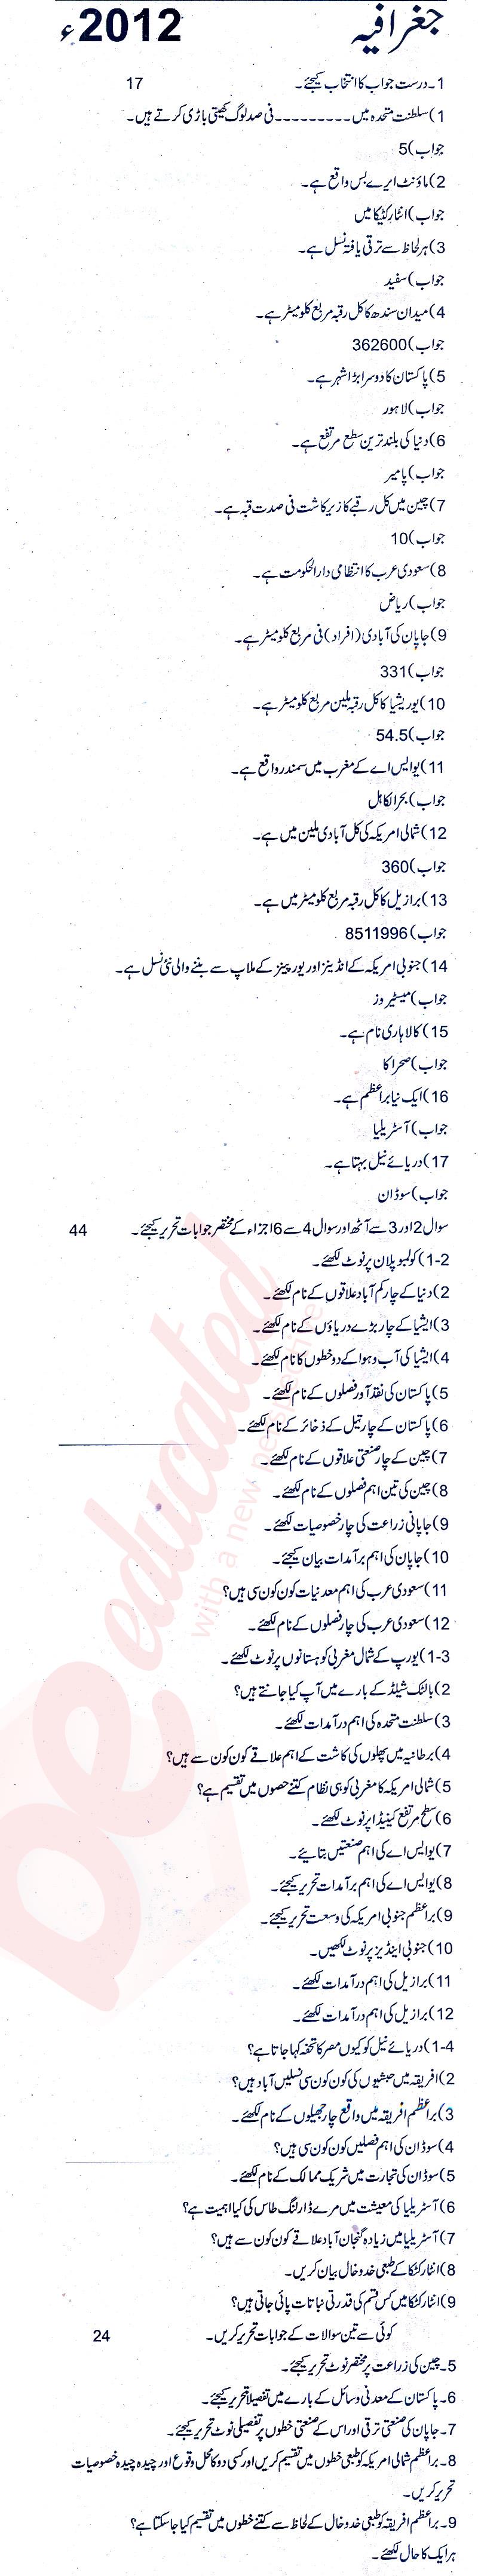 Commercial Geography FA Part 2 Past Paper Group 1 BISE Rawalpindi 2012